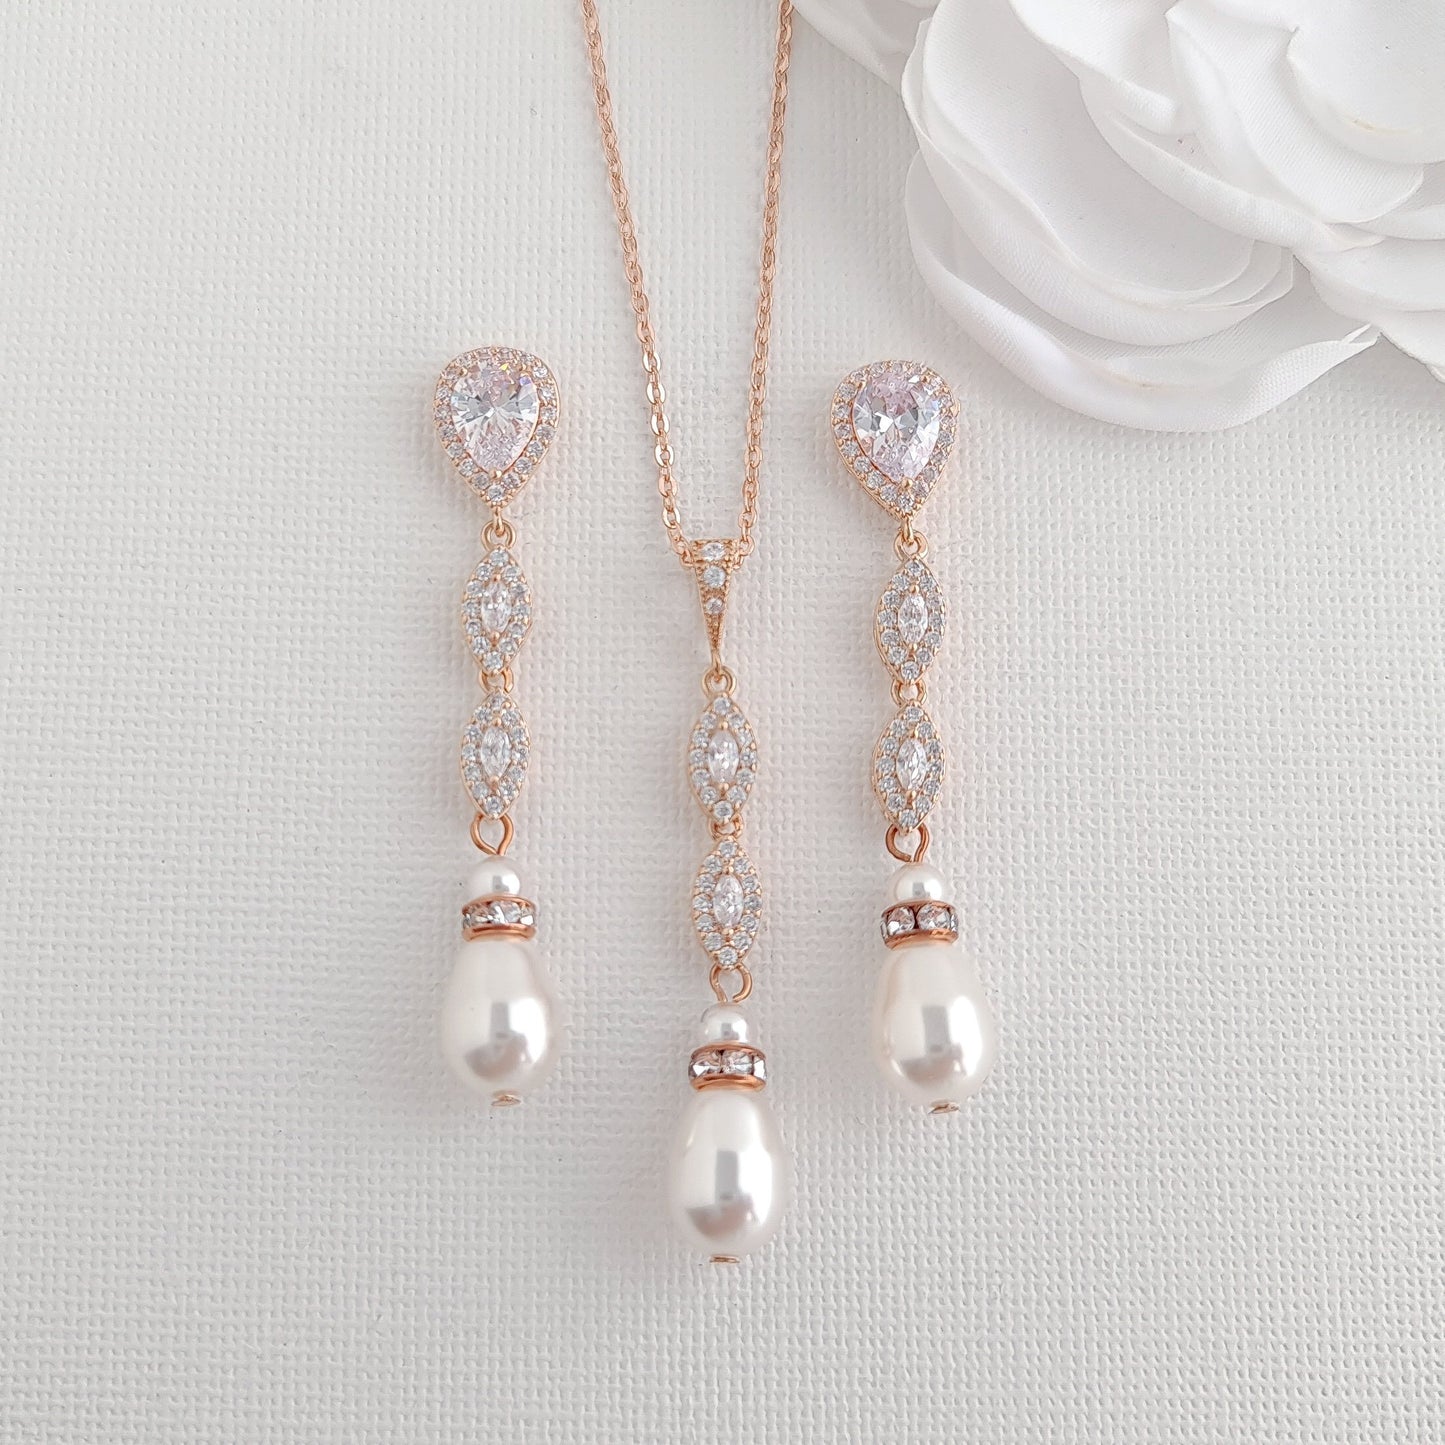 Bridal Jewelry Set With Clip On Earrings Necklace Bracelet- Abby